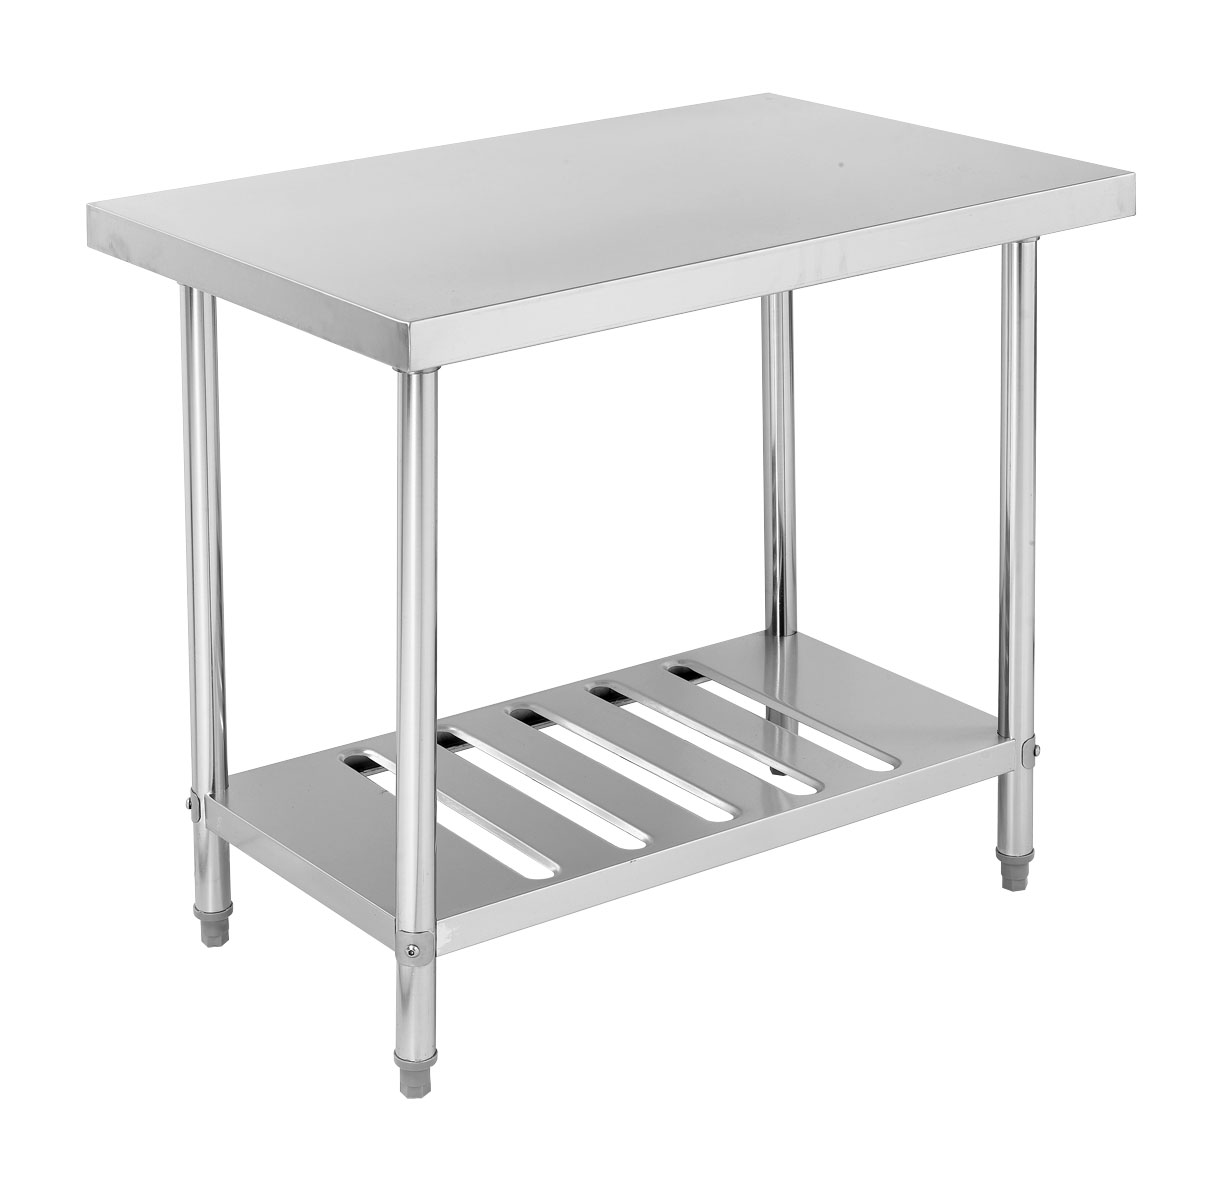 Commercial work bench Restaurant kitchen stainless steel table 1200x700mm